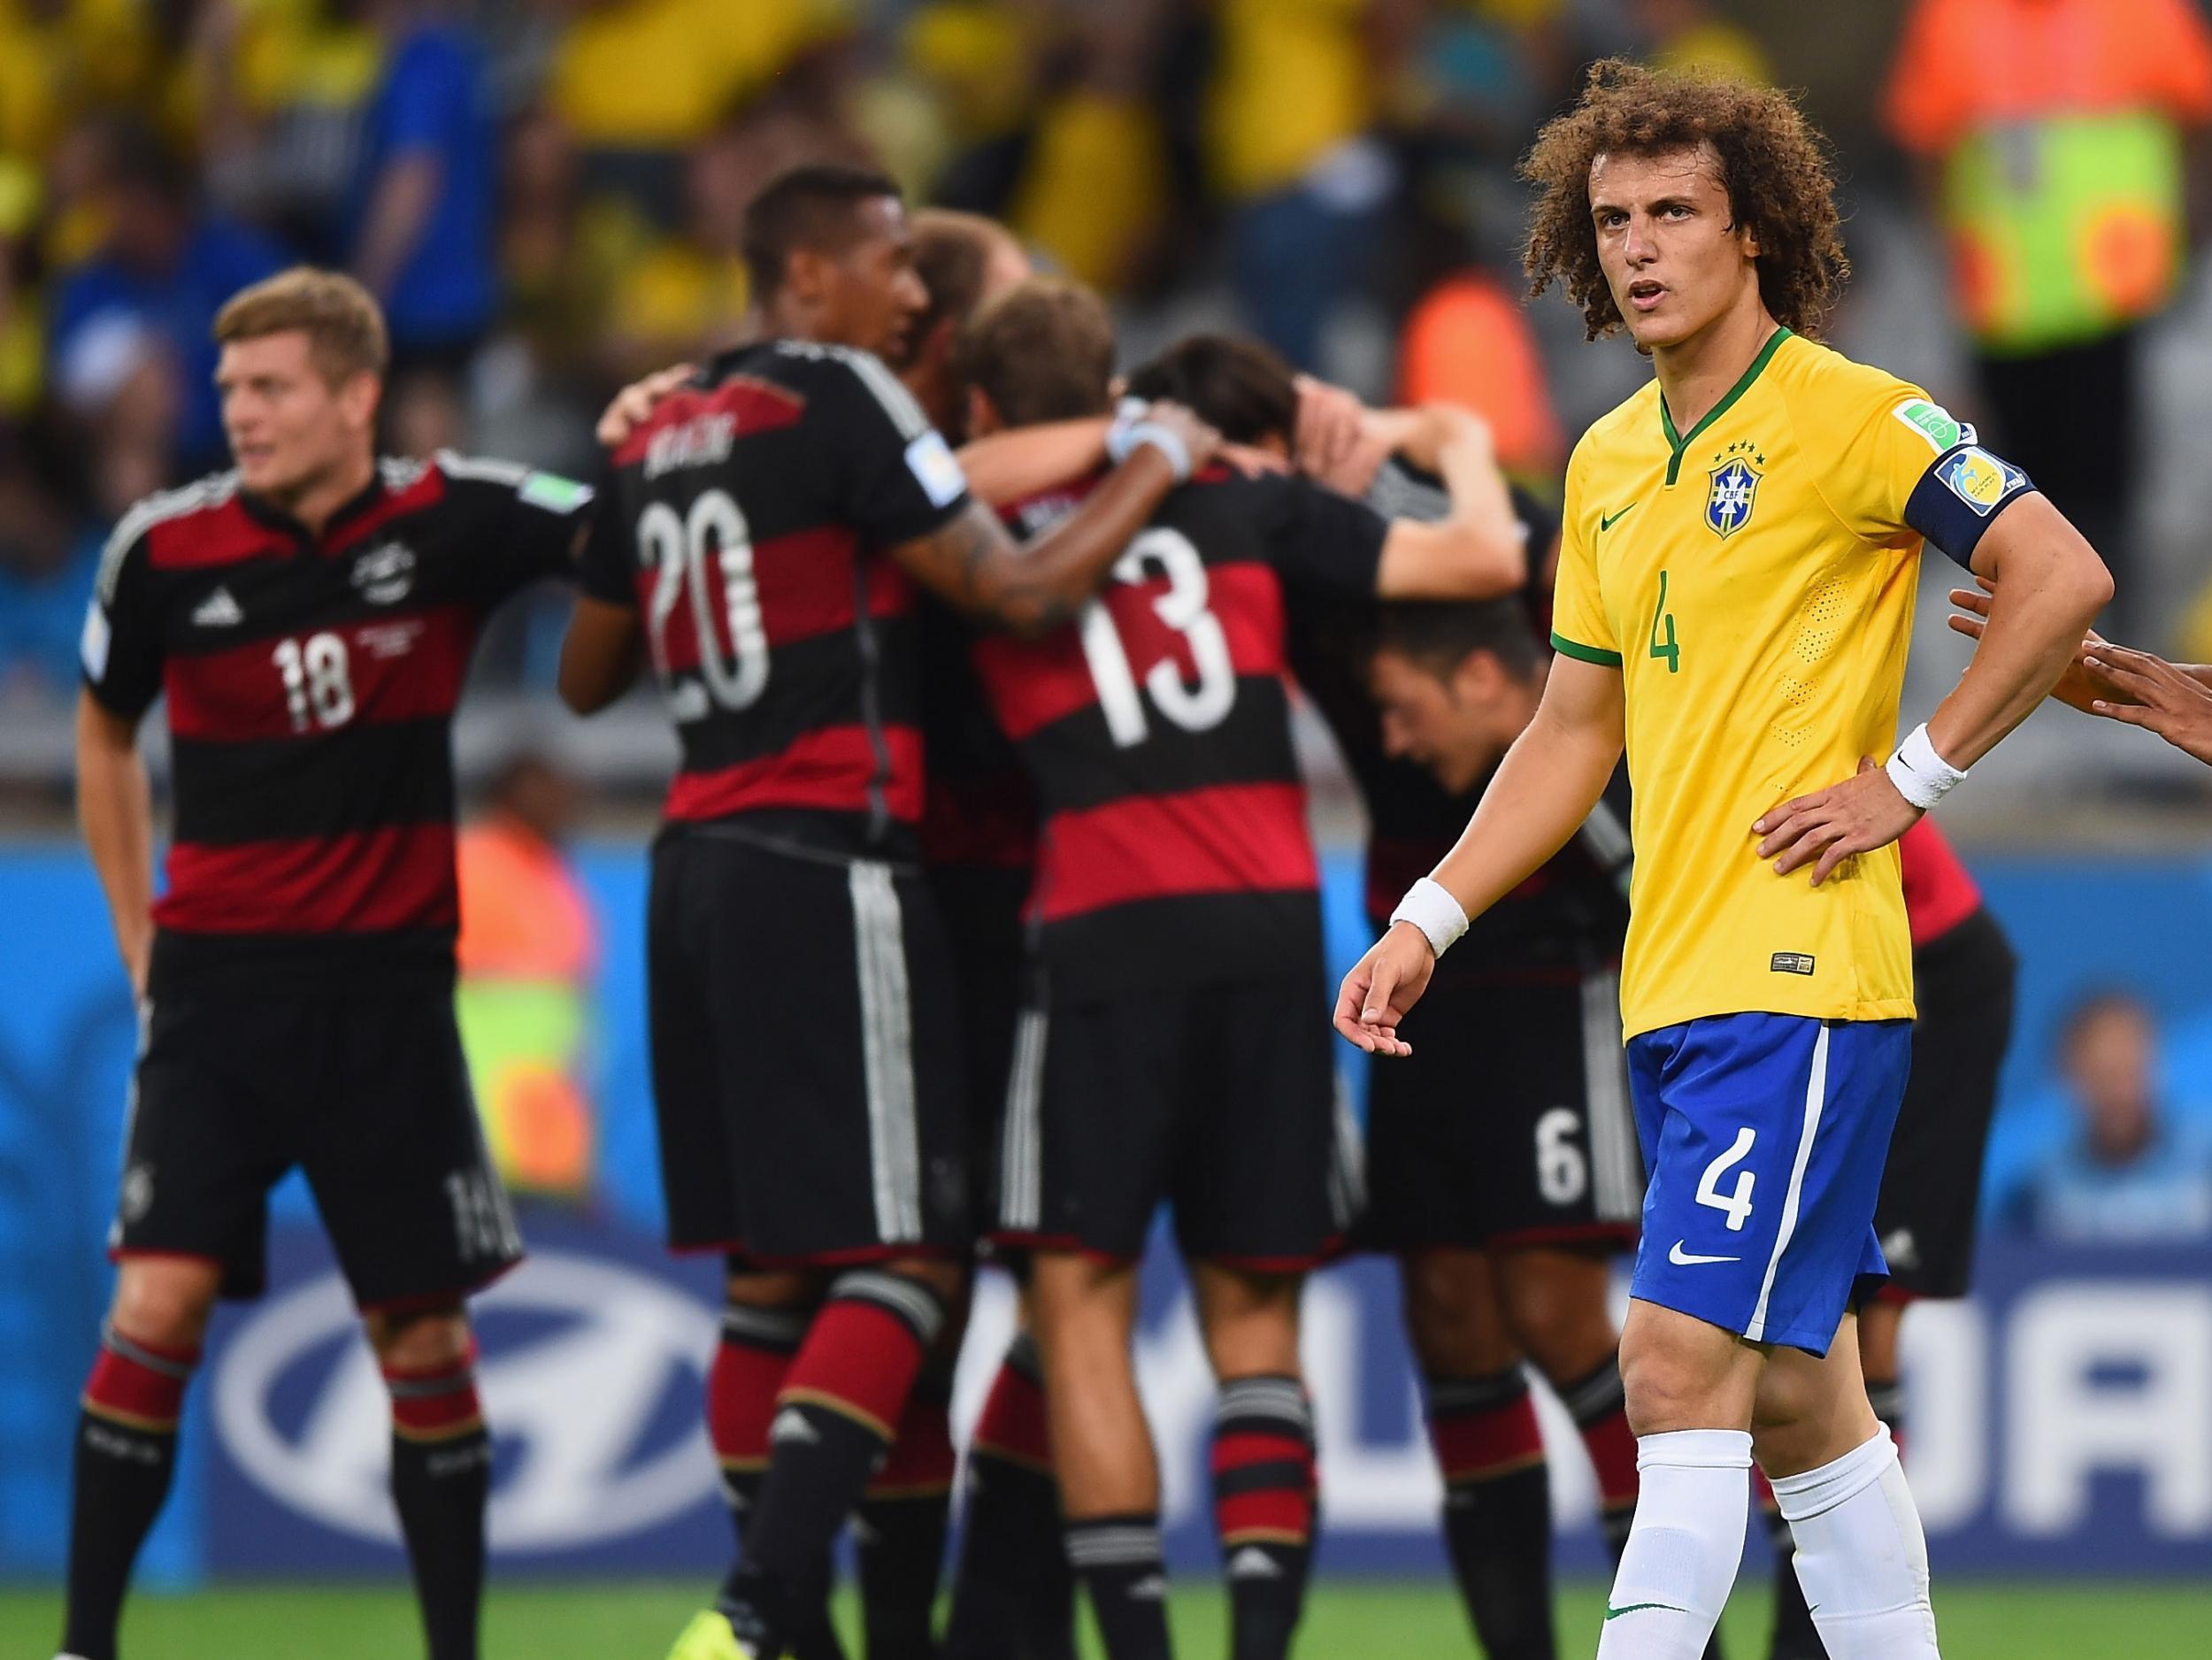 Remembering Brazil 1-7 Germany, a ghost that still haunts the Seleção today